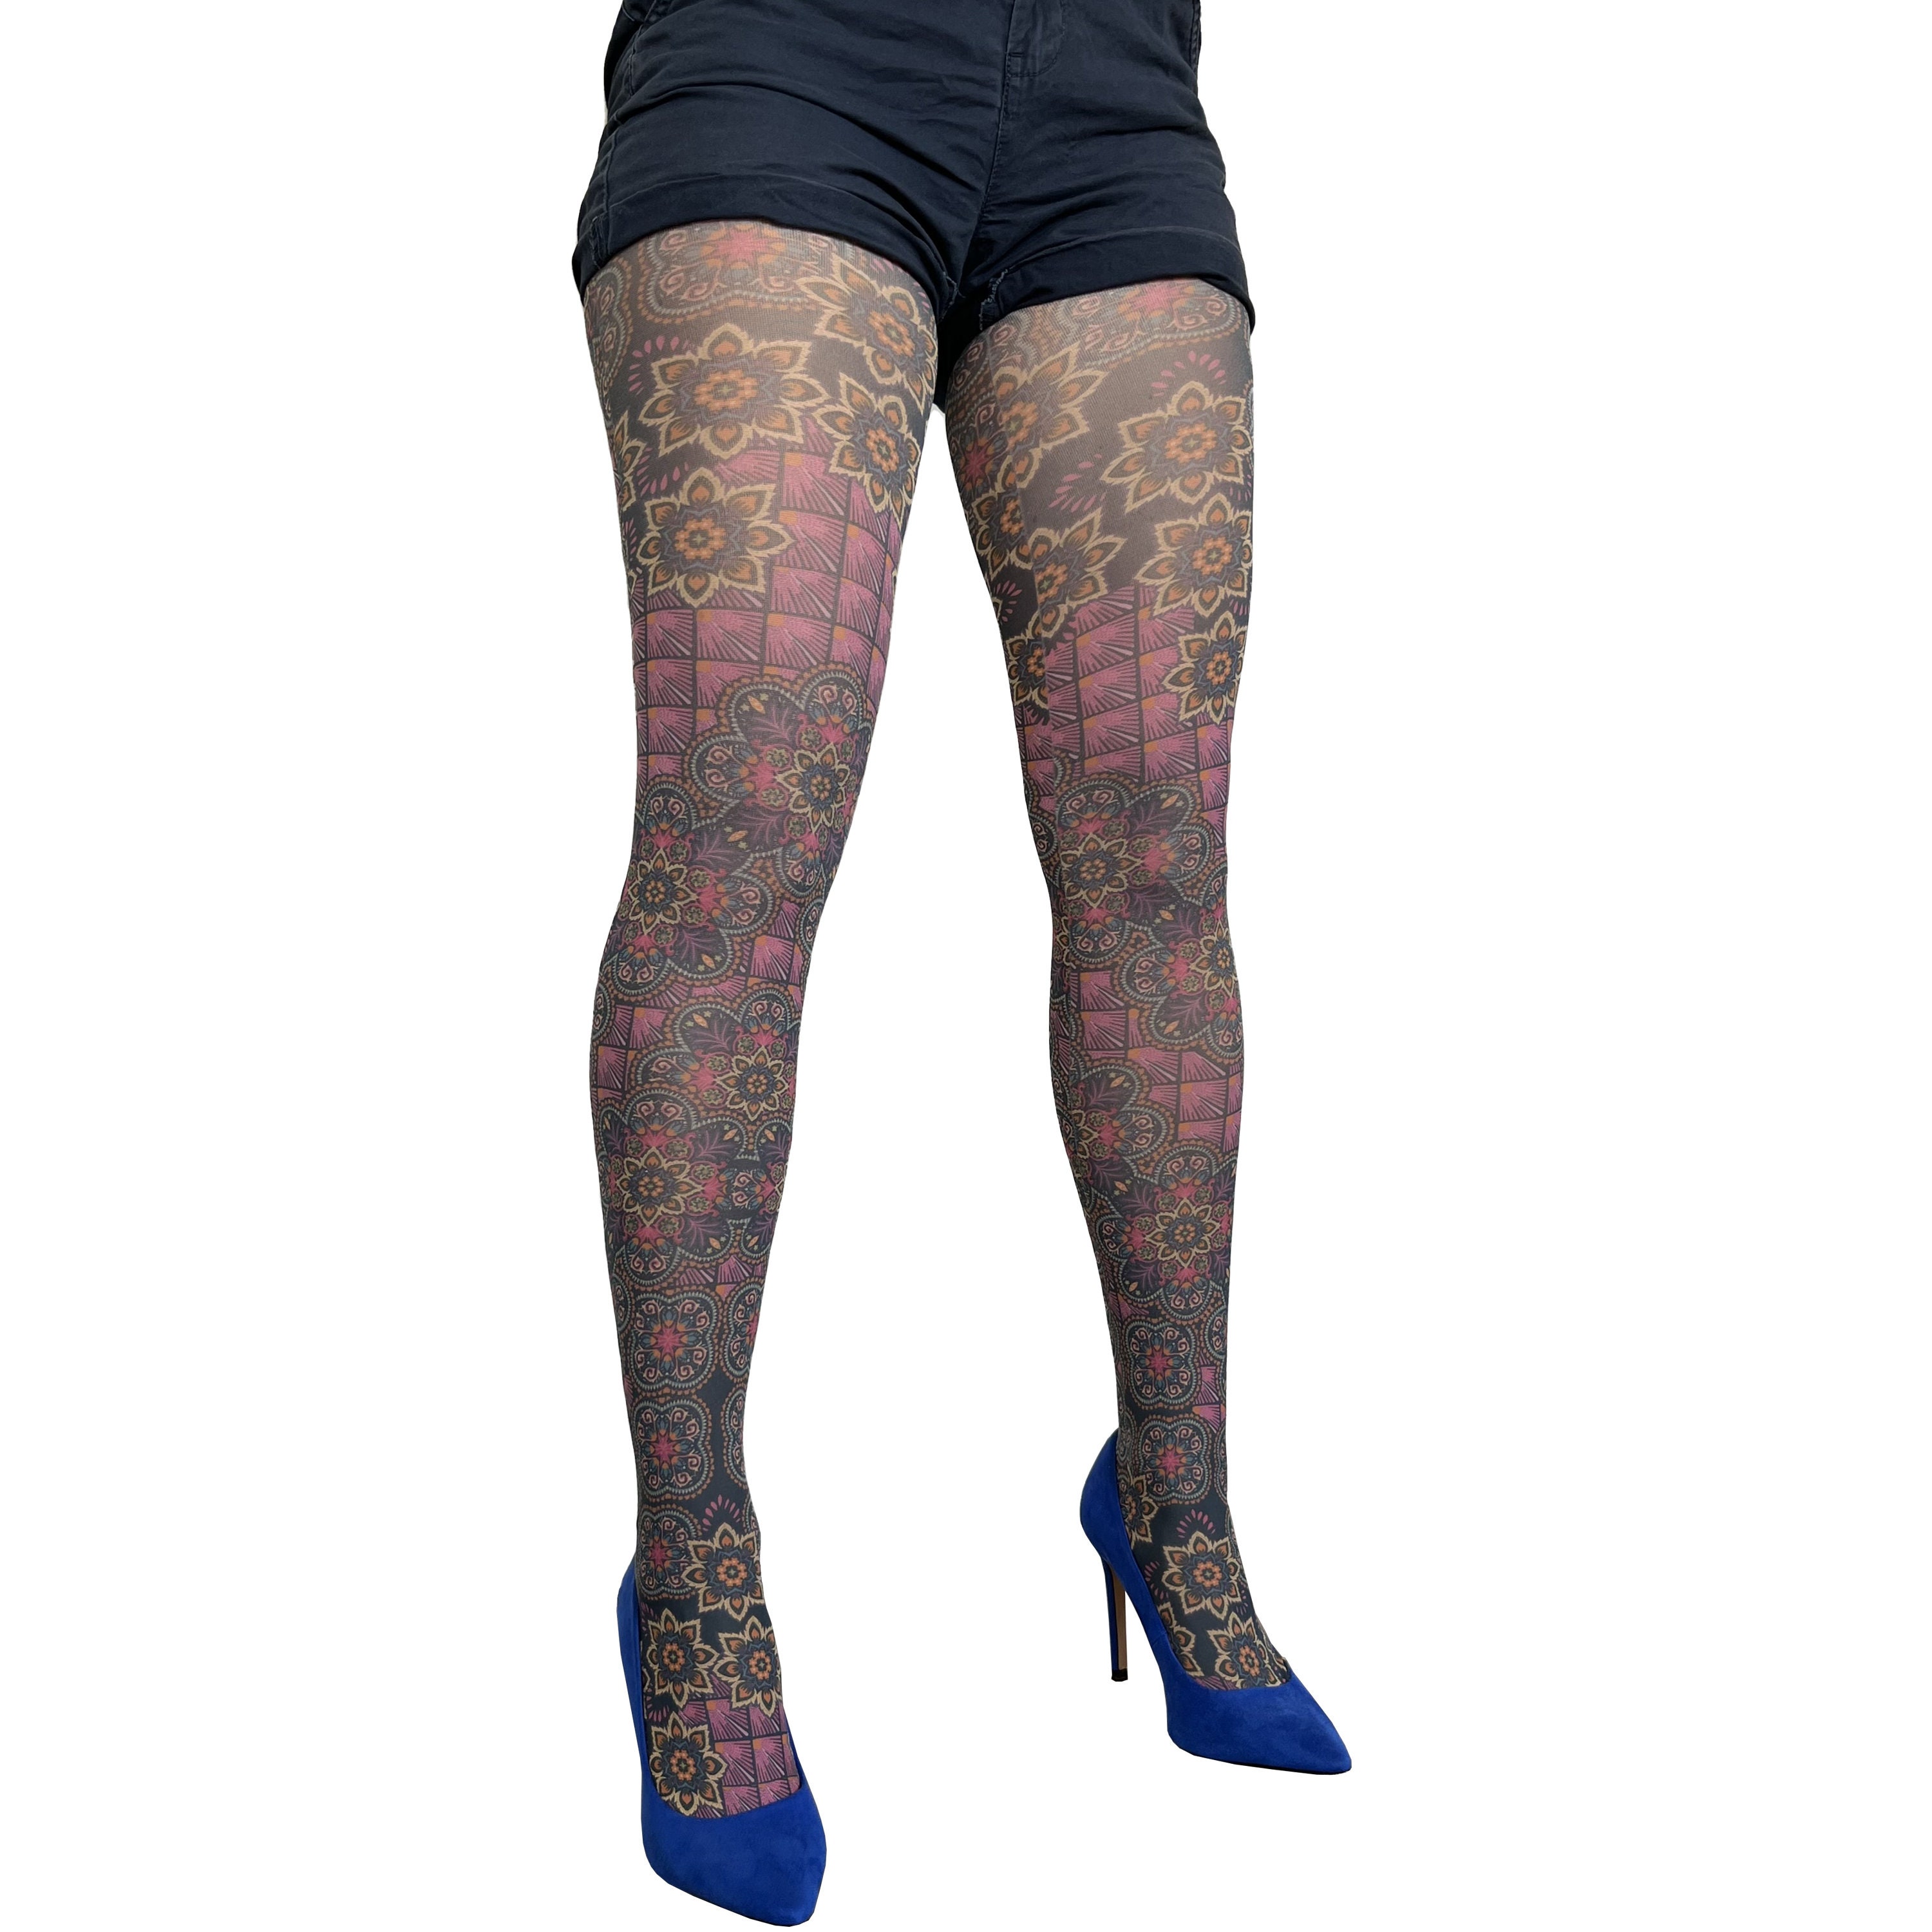 Purple Boho Chic Printed Tights Pantyhose for Women Available in Plus Size  Gift for Her 